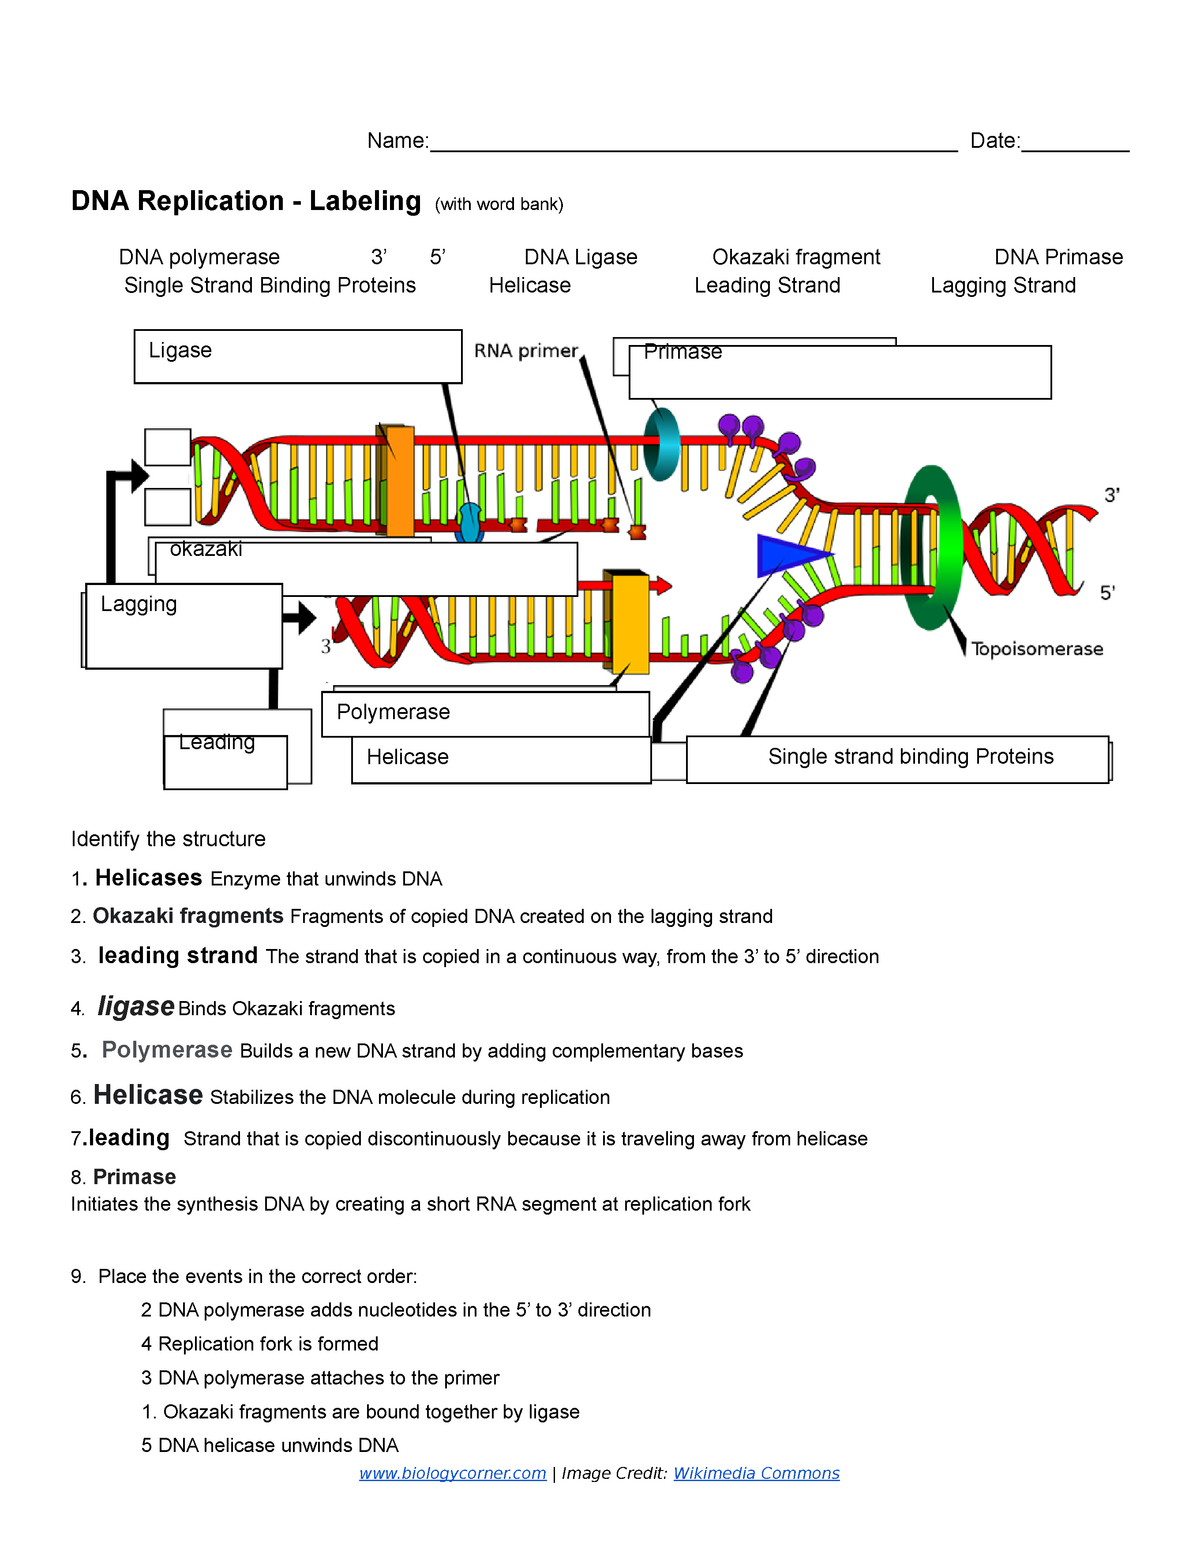 Copy of DNA Replication - Labeling 10 - Name: - StuDocu Intended For Dna Replication Worksheet Answers